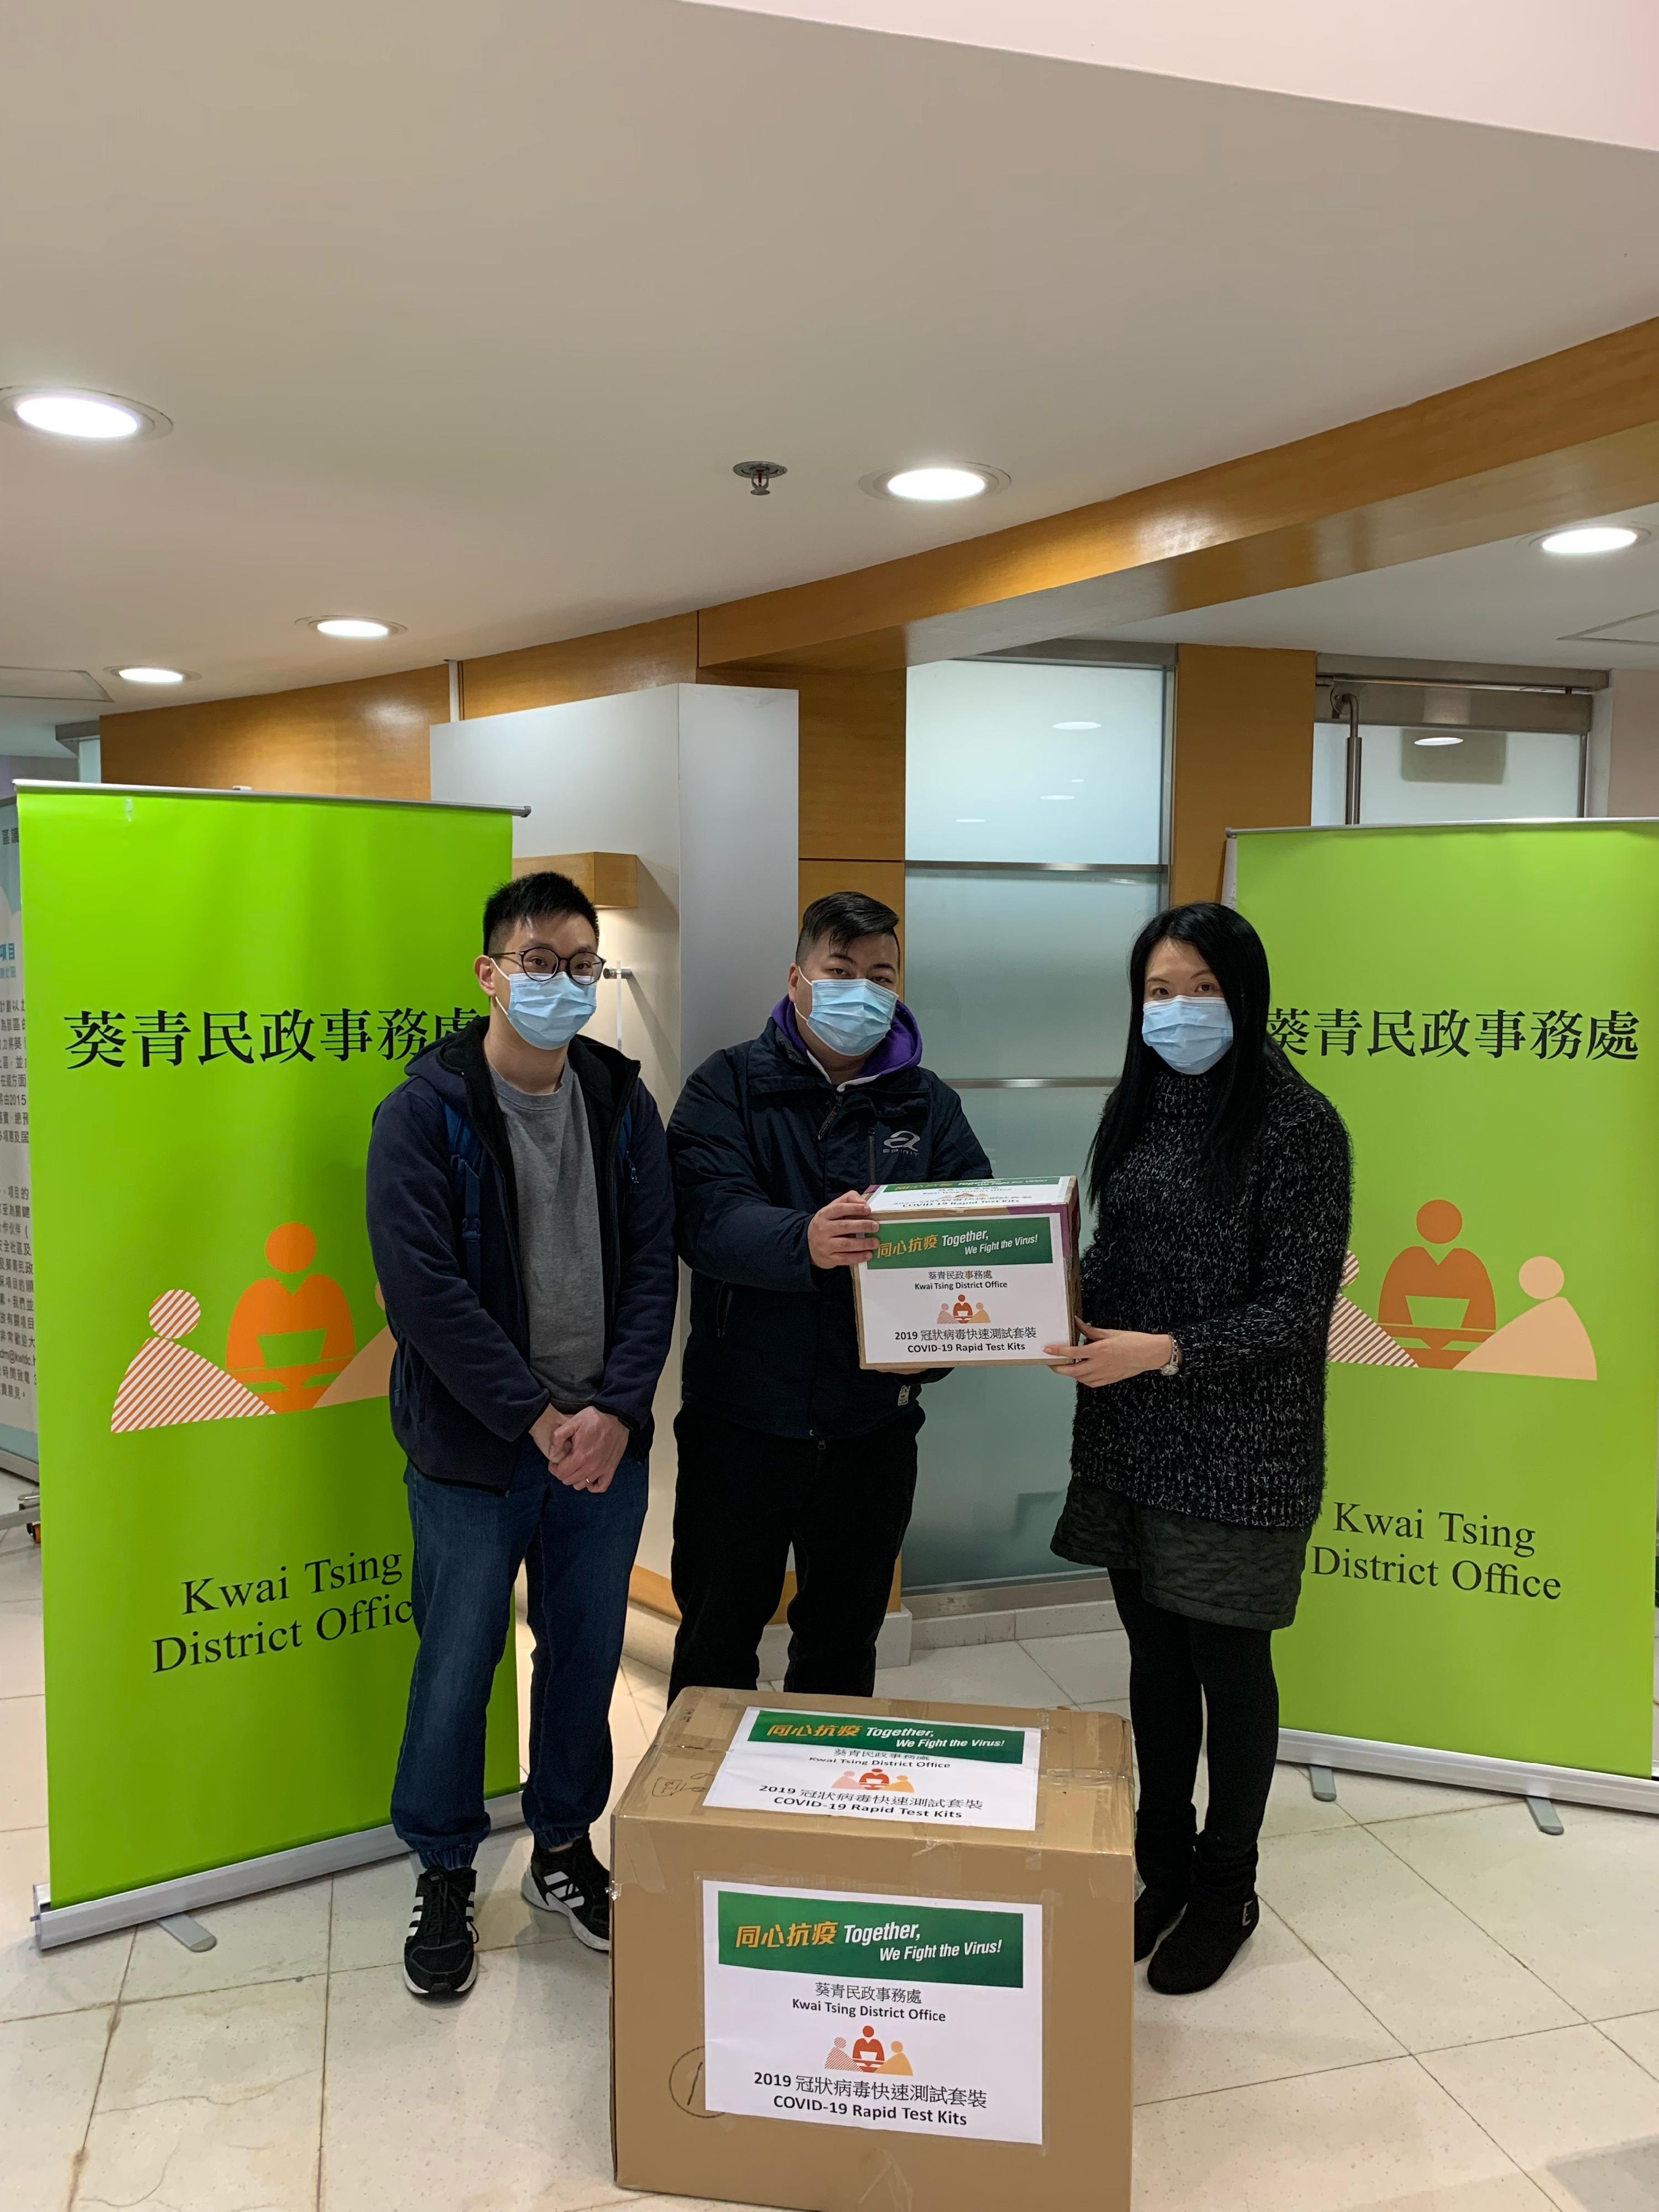 The Kwai Tsing District Office today (February 20) distributed COVID-19 rapid test kits to cleansing workers and property management staff working in Shek Lei (I) Estate, Shek Lei (II) Estate and On Yam Estate for voluntary testing through the Housing Department and the property management companies.